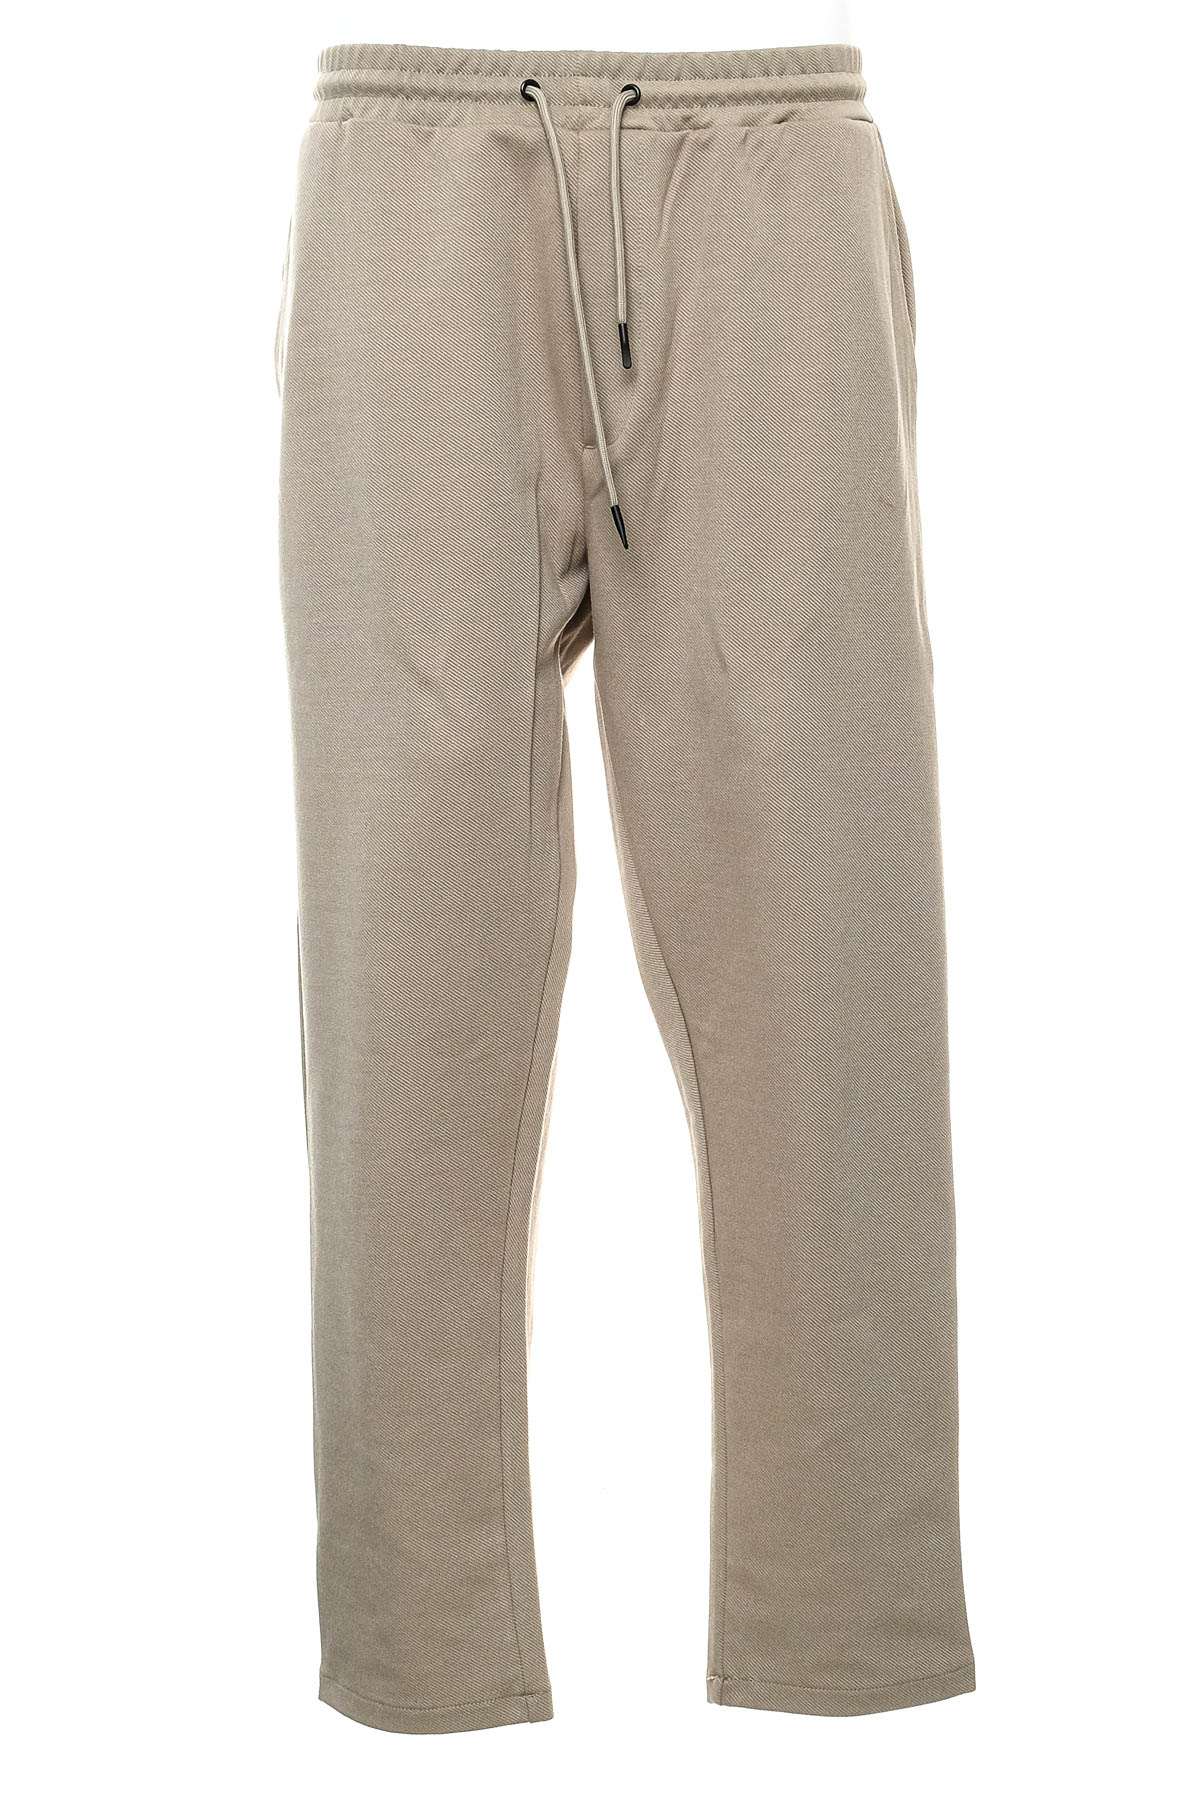 Men's trousers - ICONO by SMOG - 0